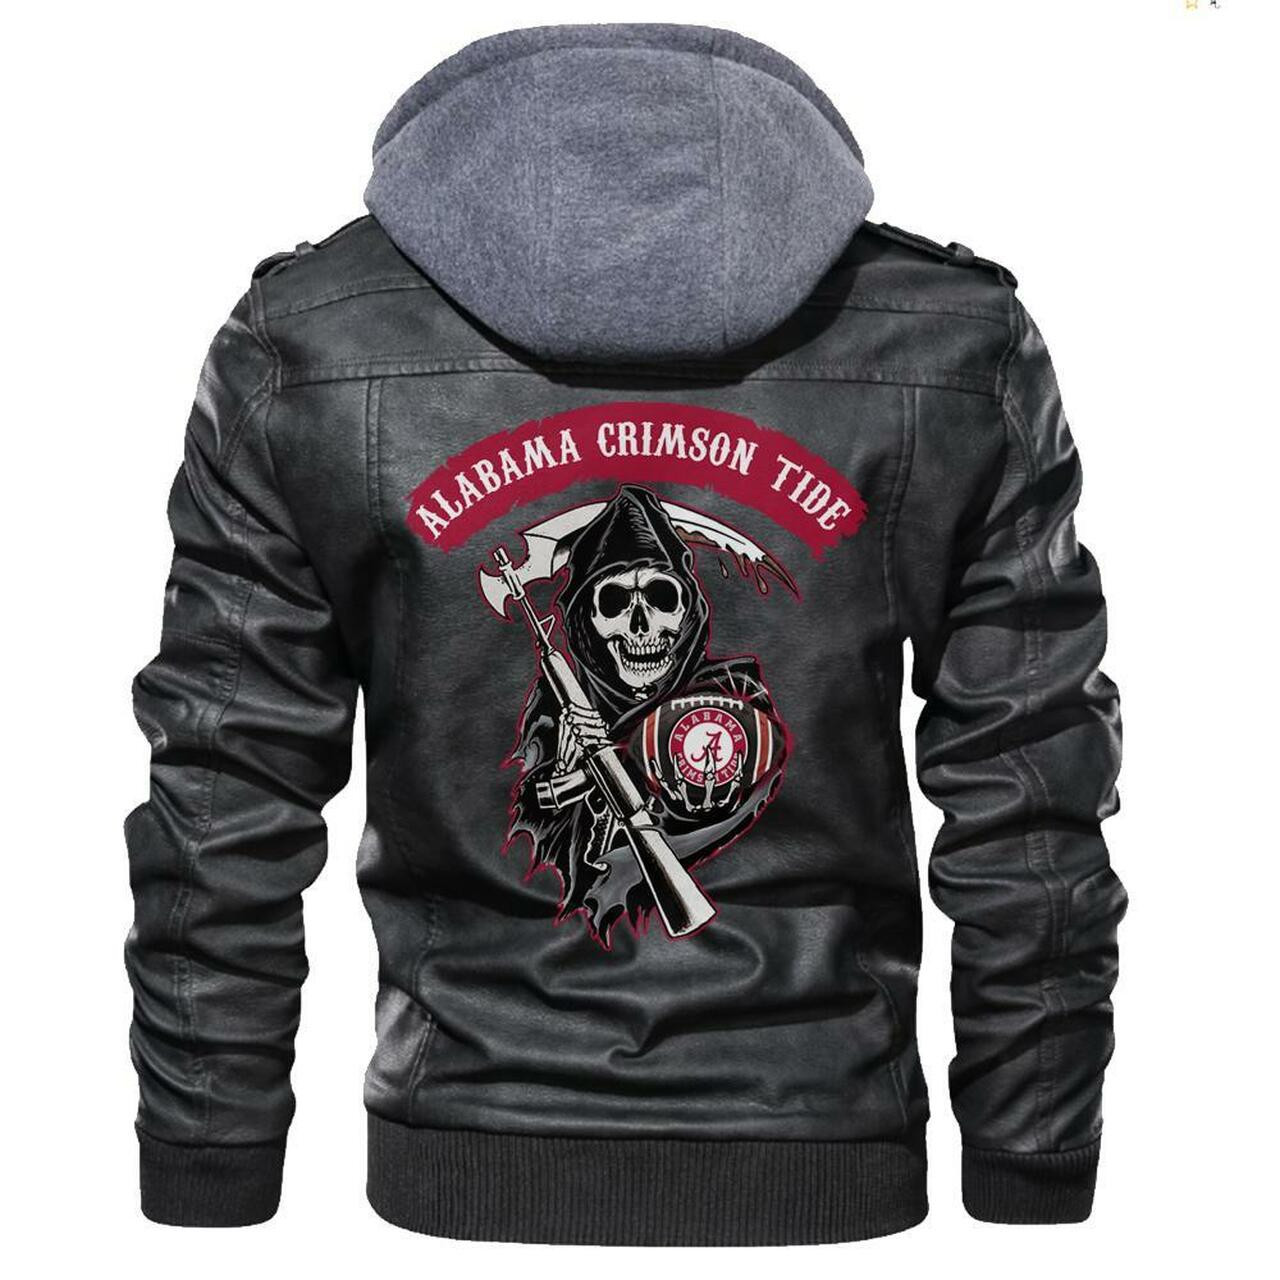 Our store has all of the latest leather jacket 117